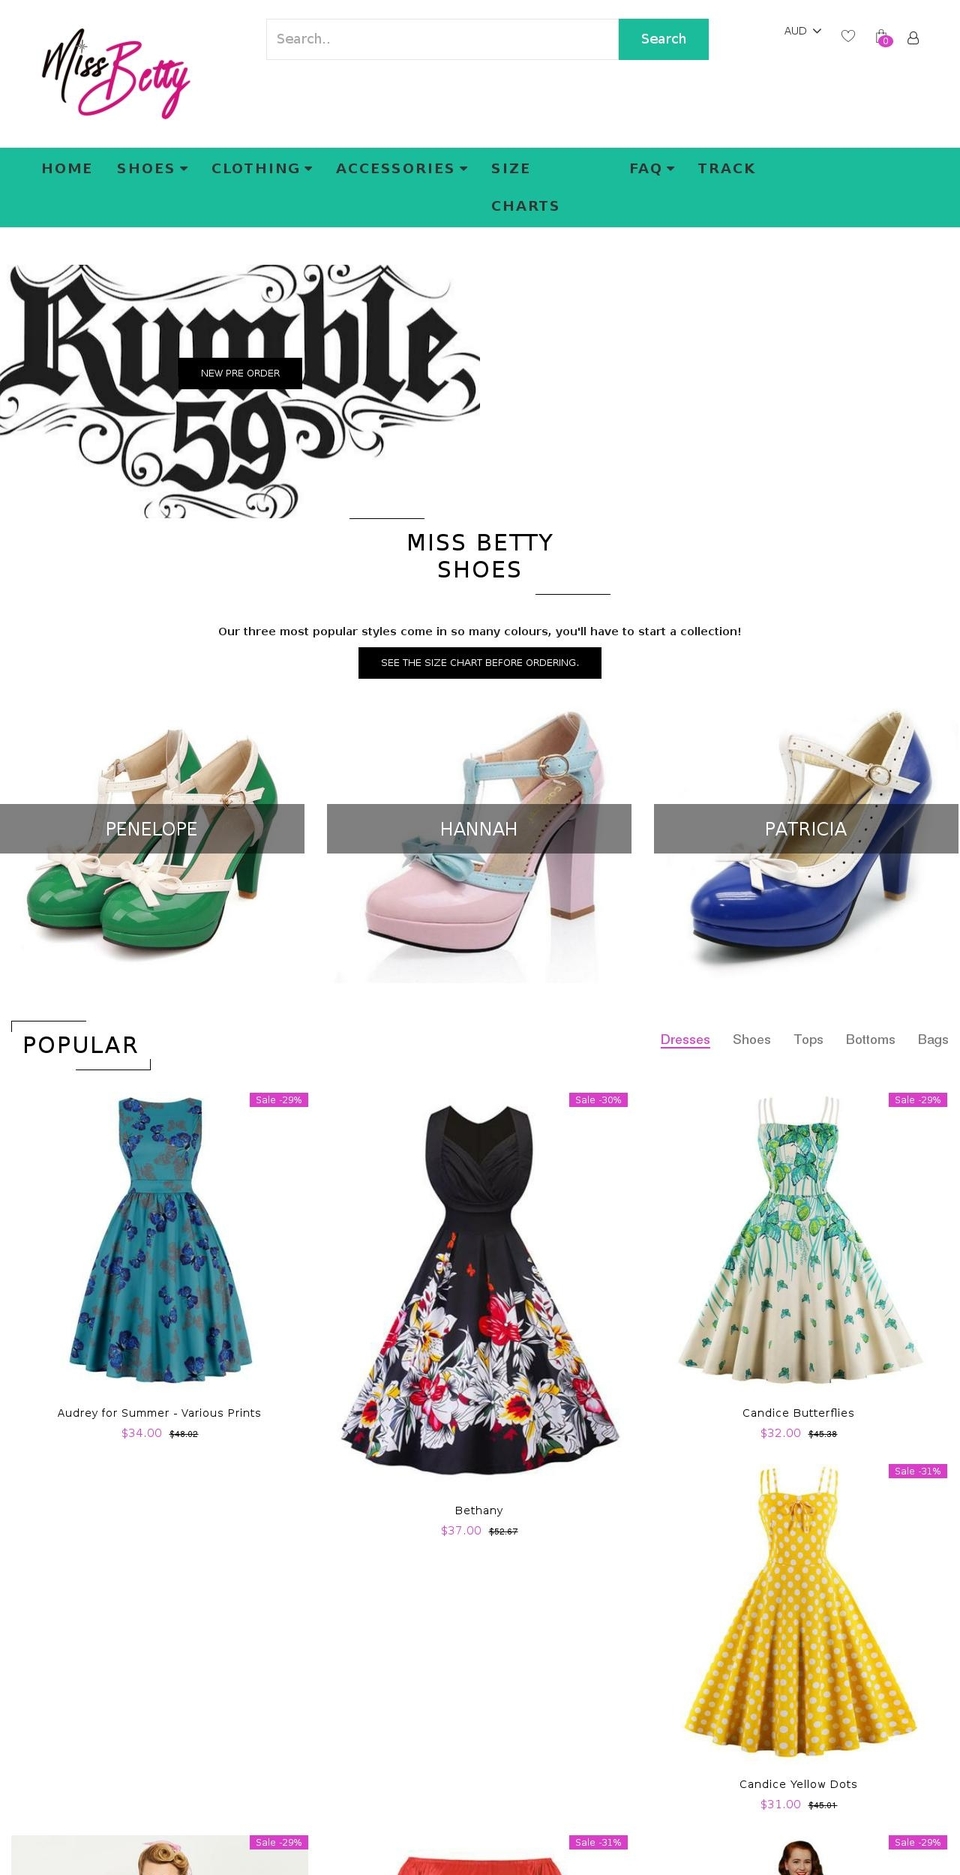 a1shop Shopify theme site example missbettyclothing.com